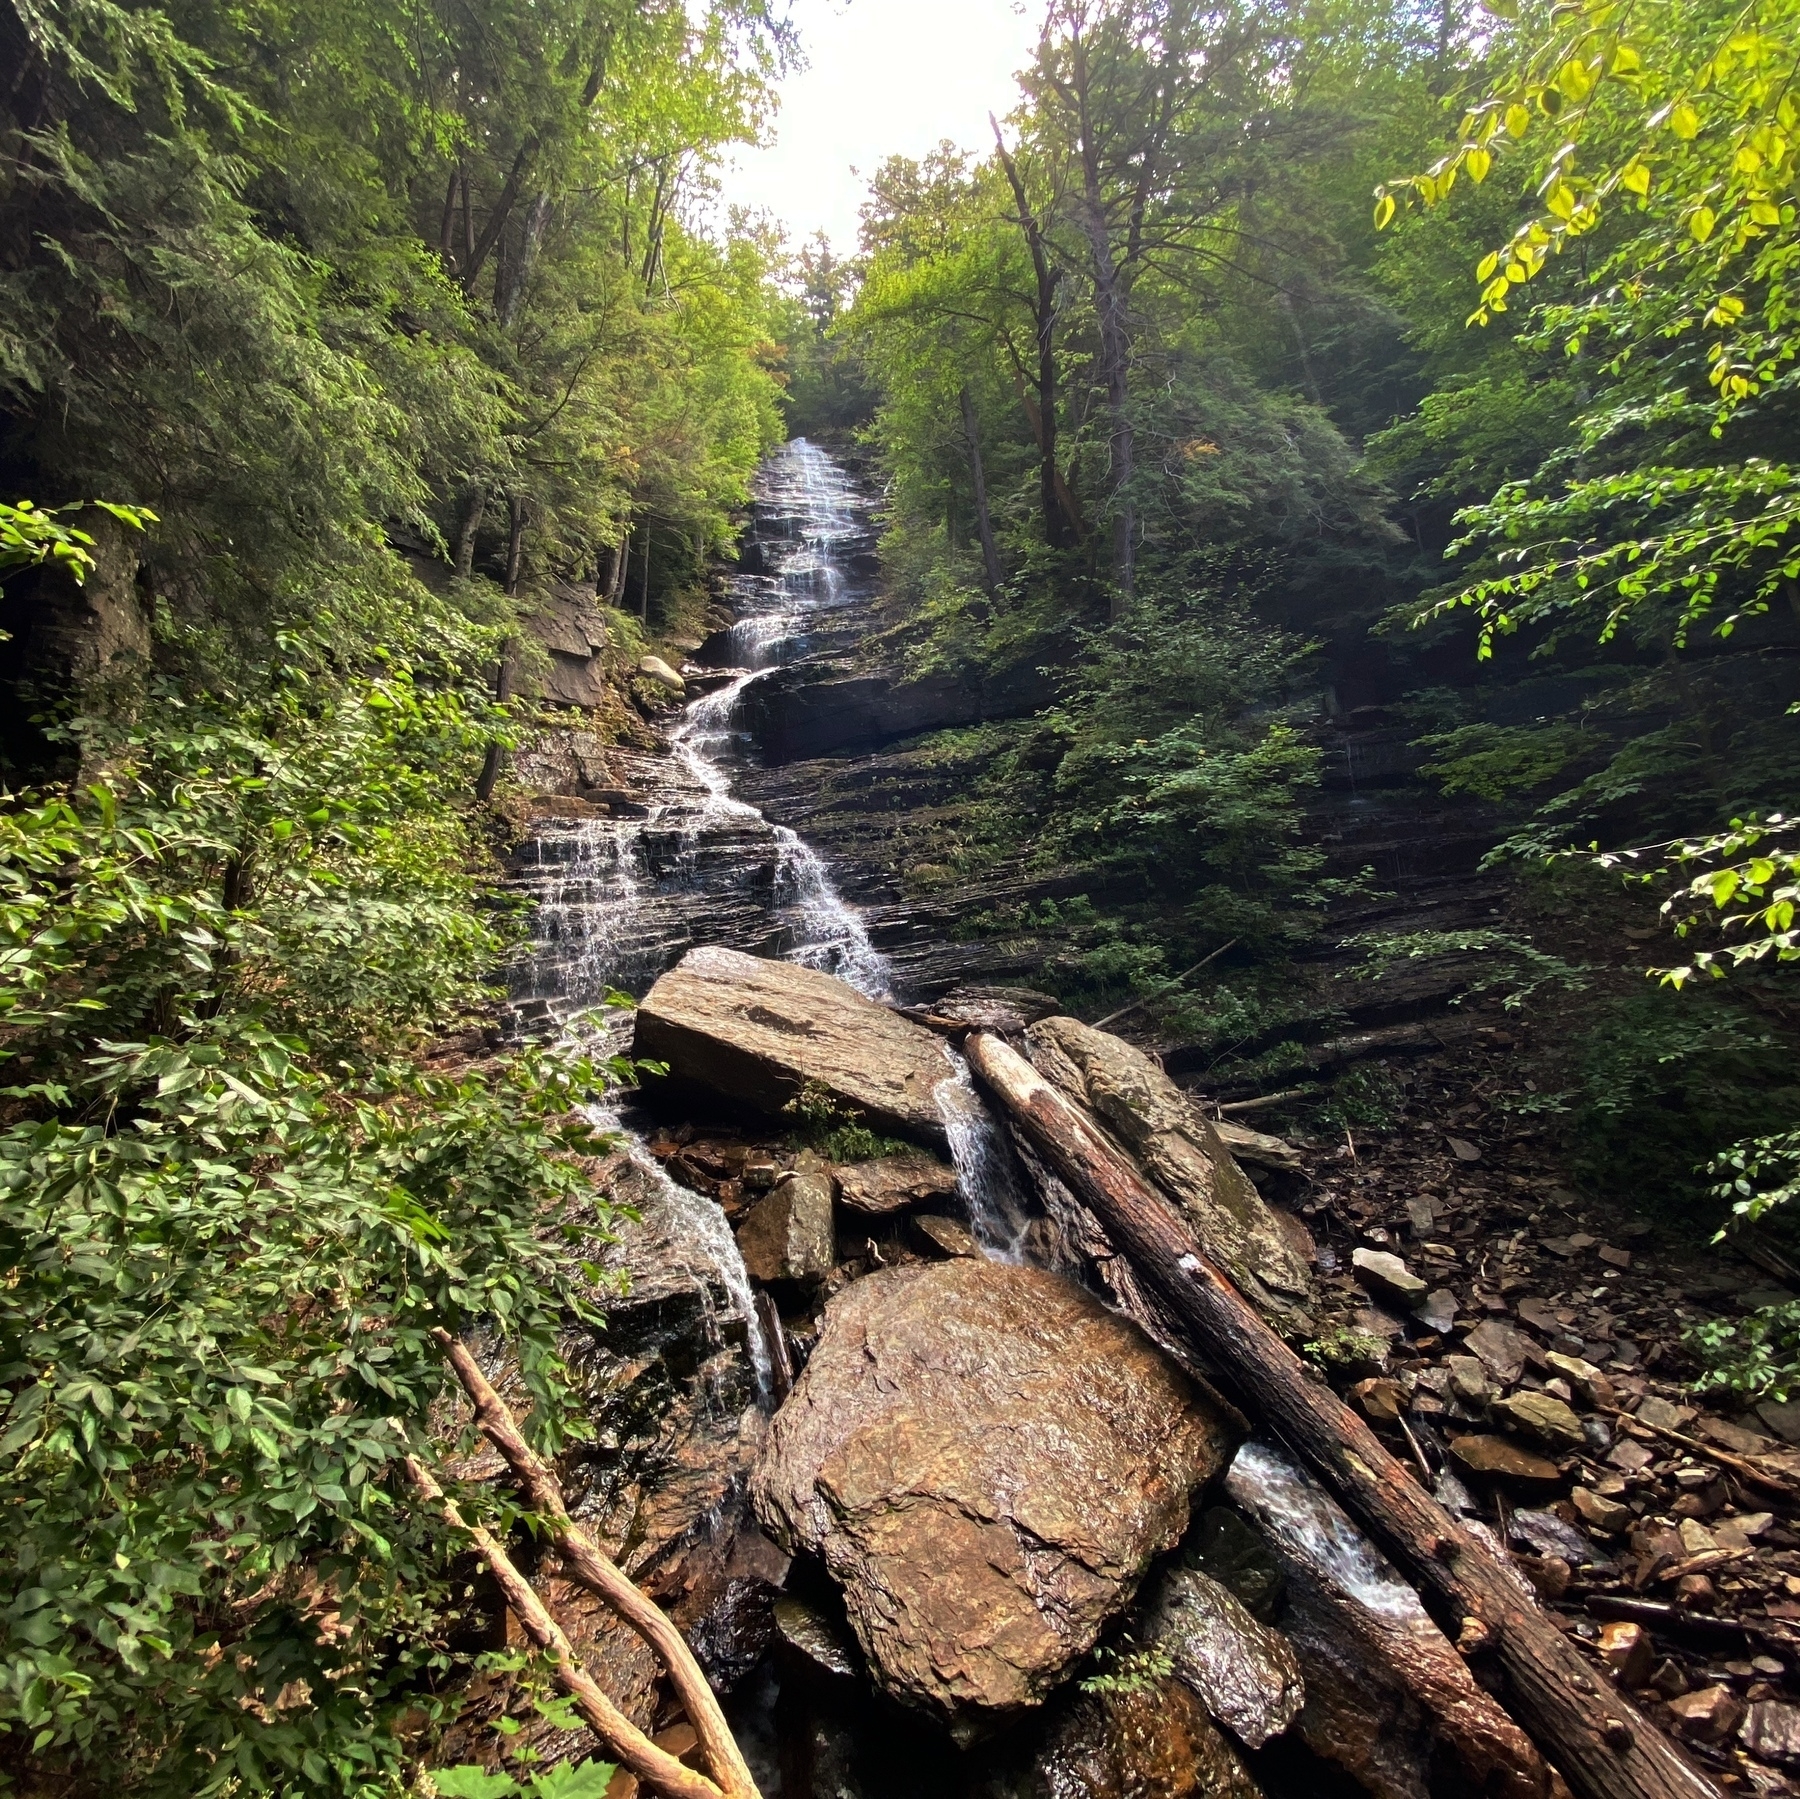 A tall waterfall comes down over rocks, with woods on both sides